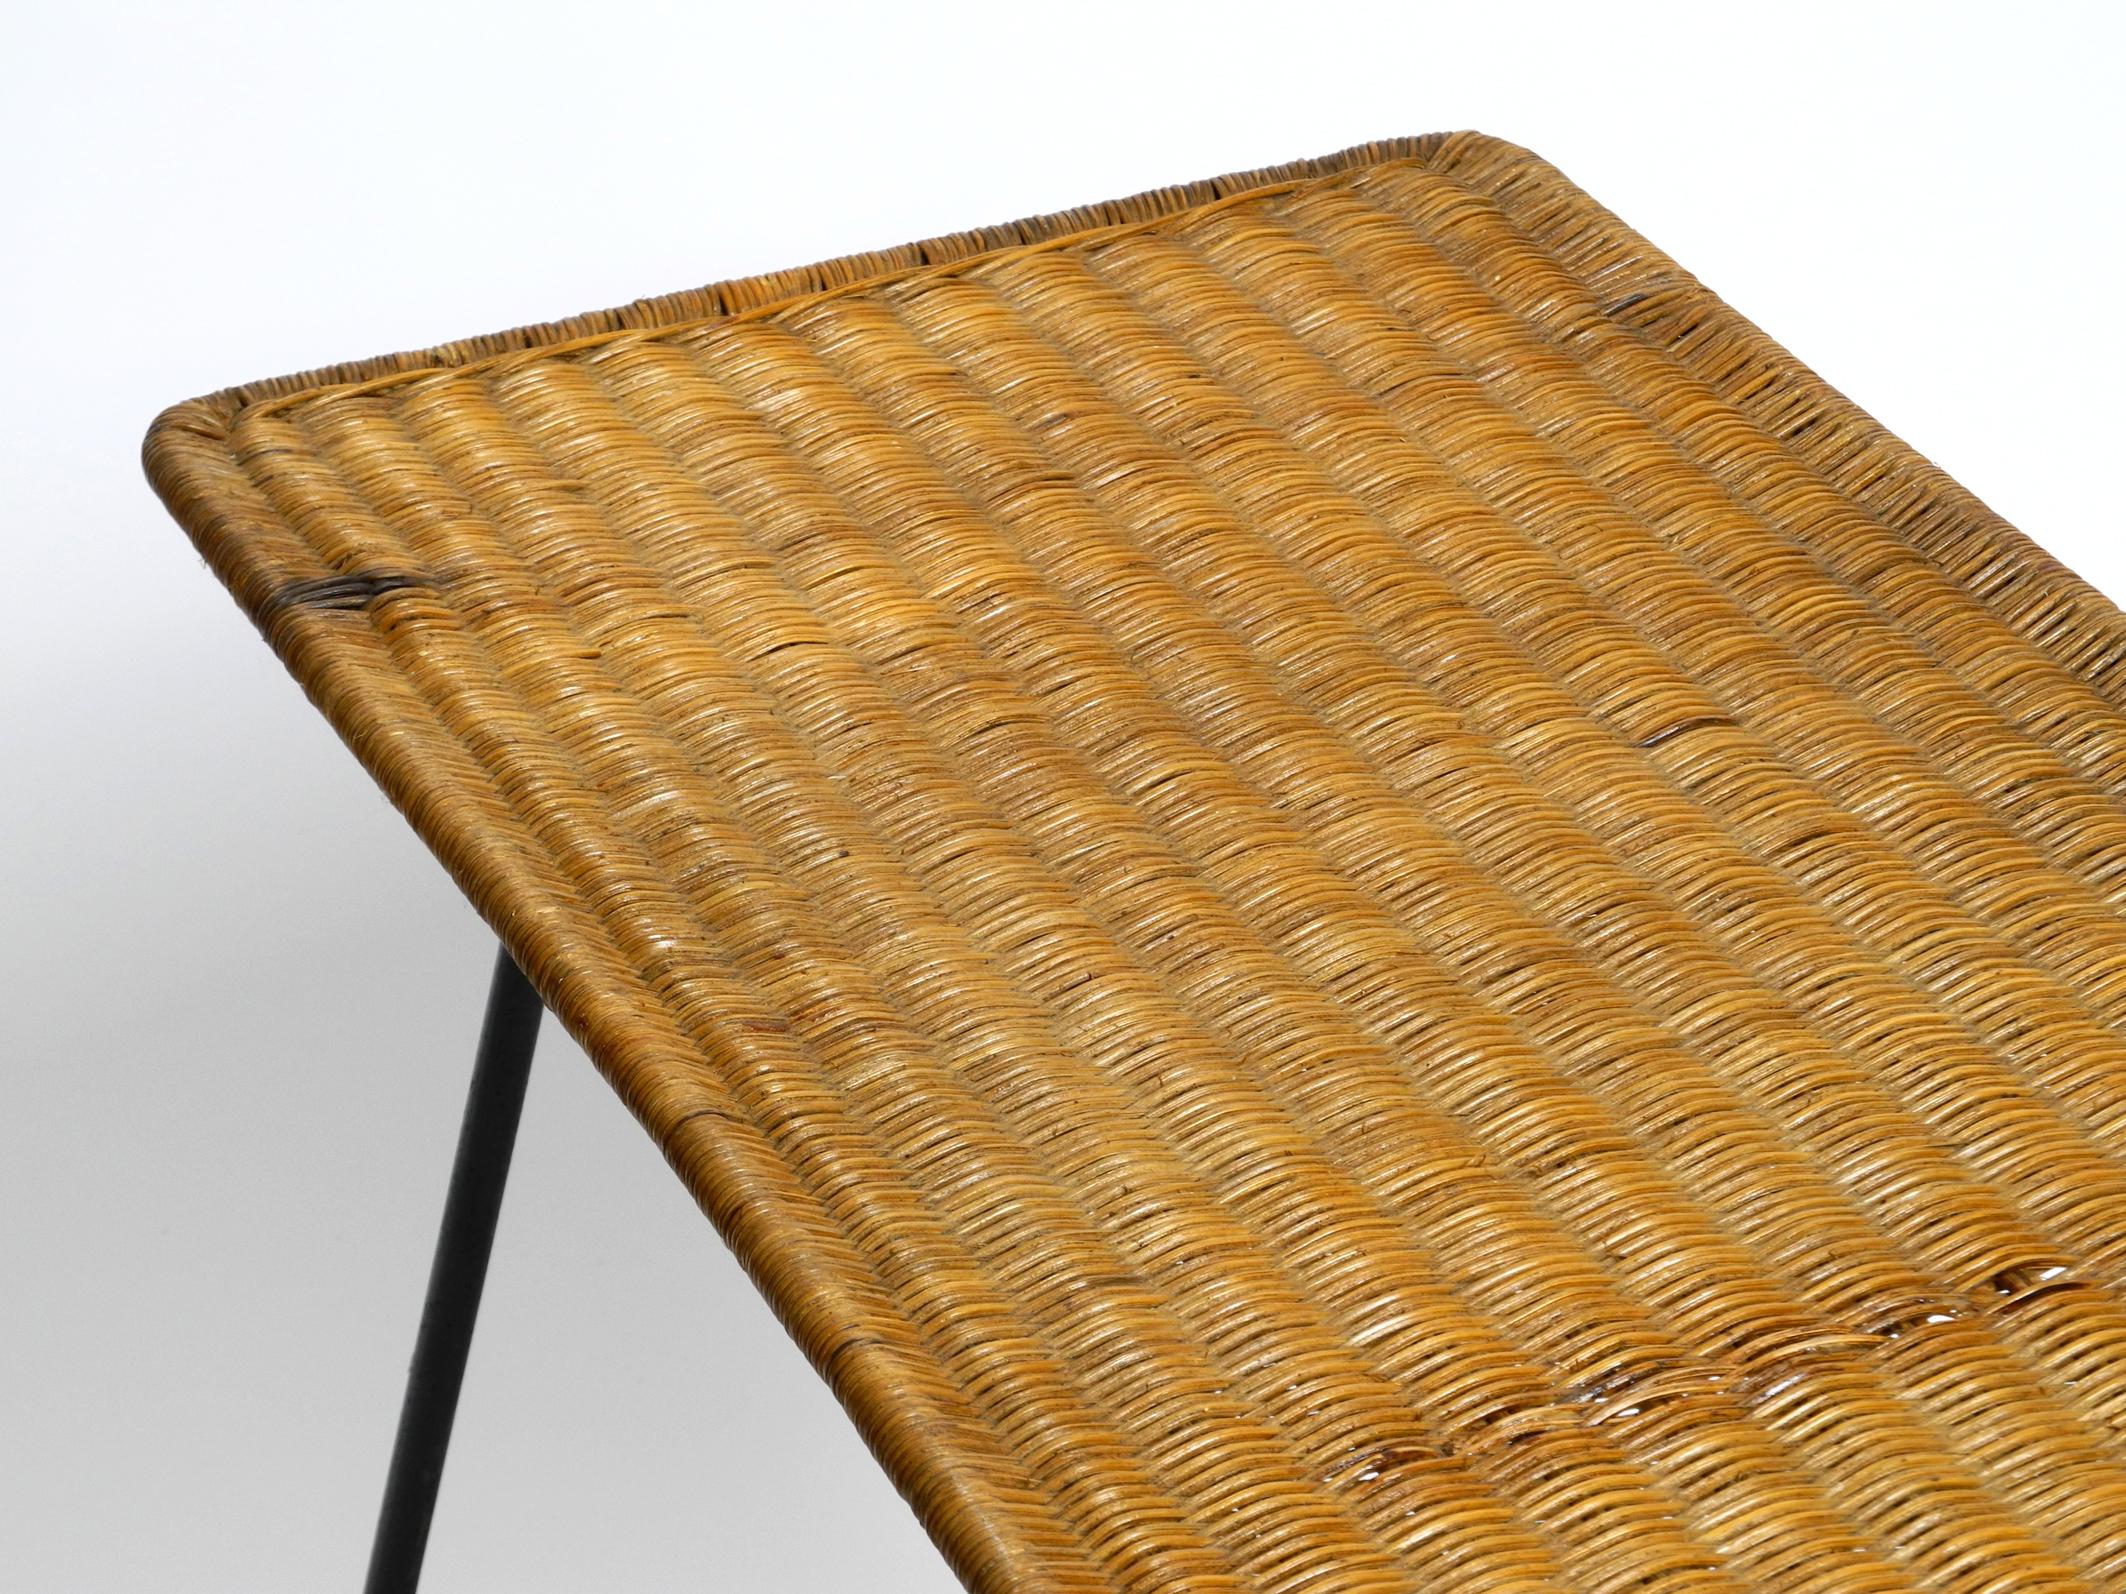 Italian Mid-Century Modern Rattan Side or Coffee Table with a Heavy Iron Frame For Sale 7